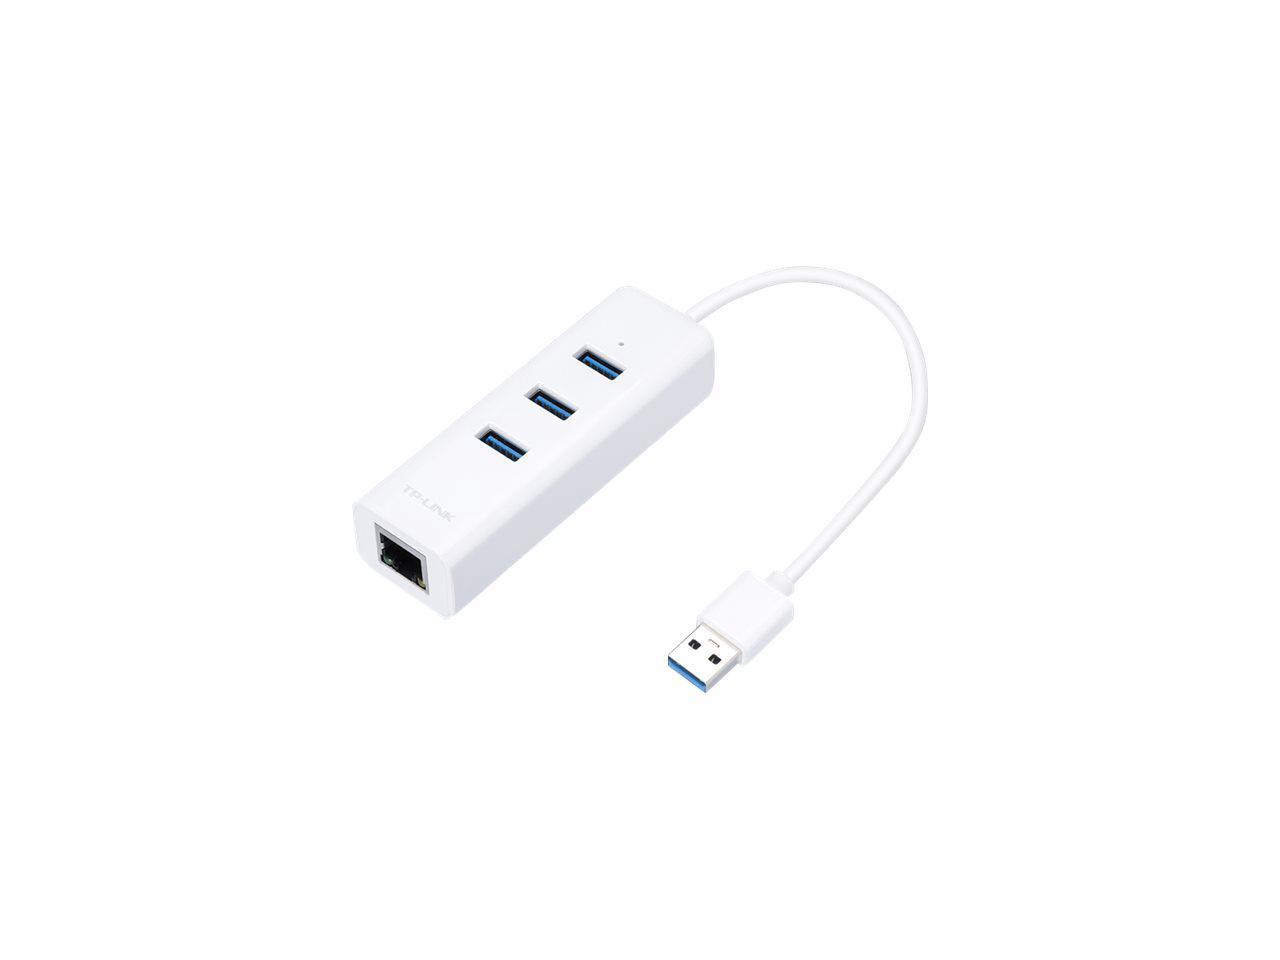 USB 3.0 to Ethernet Adapter, Portable 3-port USB Hub with 1 Gigabit RJ45 Ethernet Network Adapter, Supports Windows 7/8/8.1/10, Mac OS X Linux OS and OS - Newegg.com